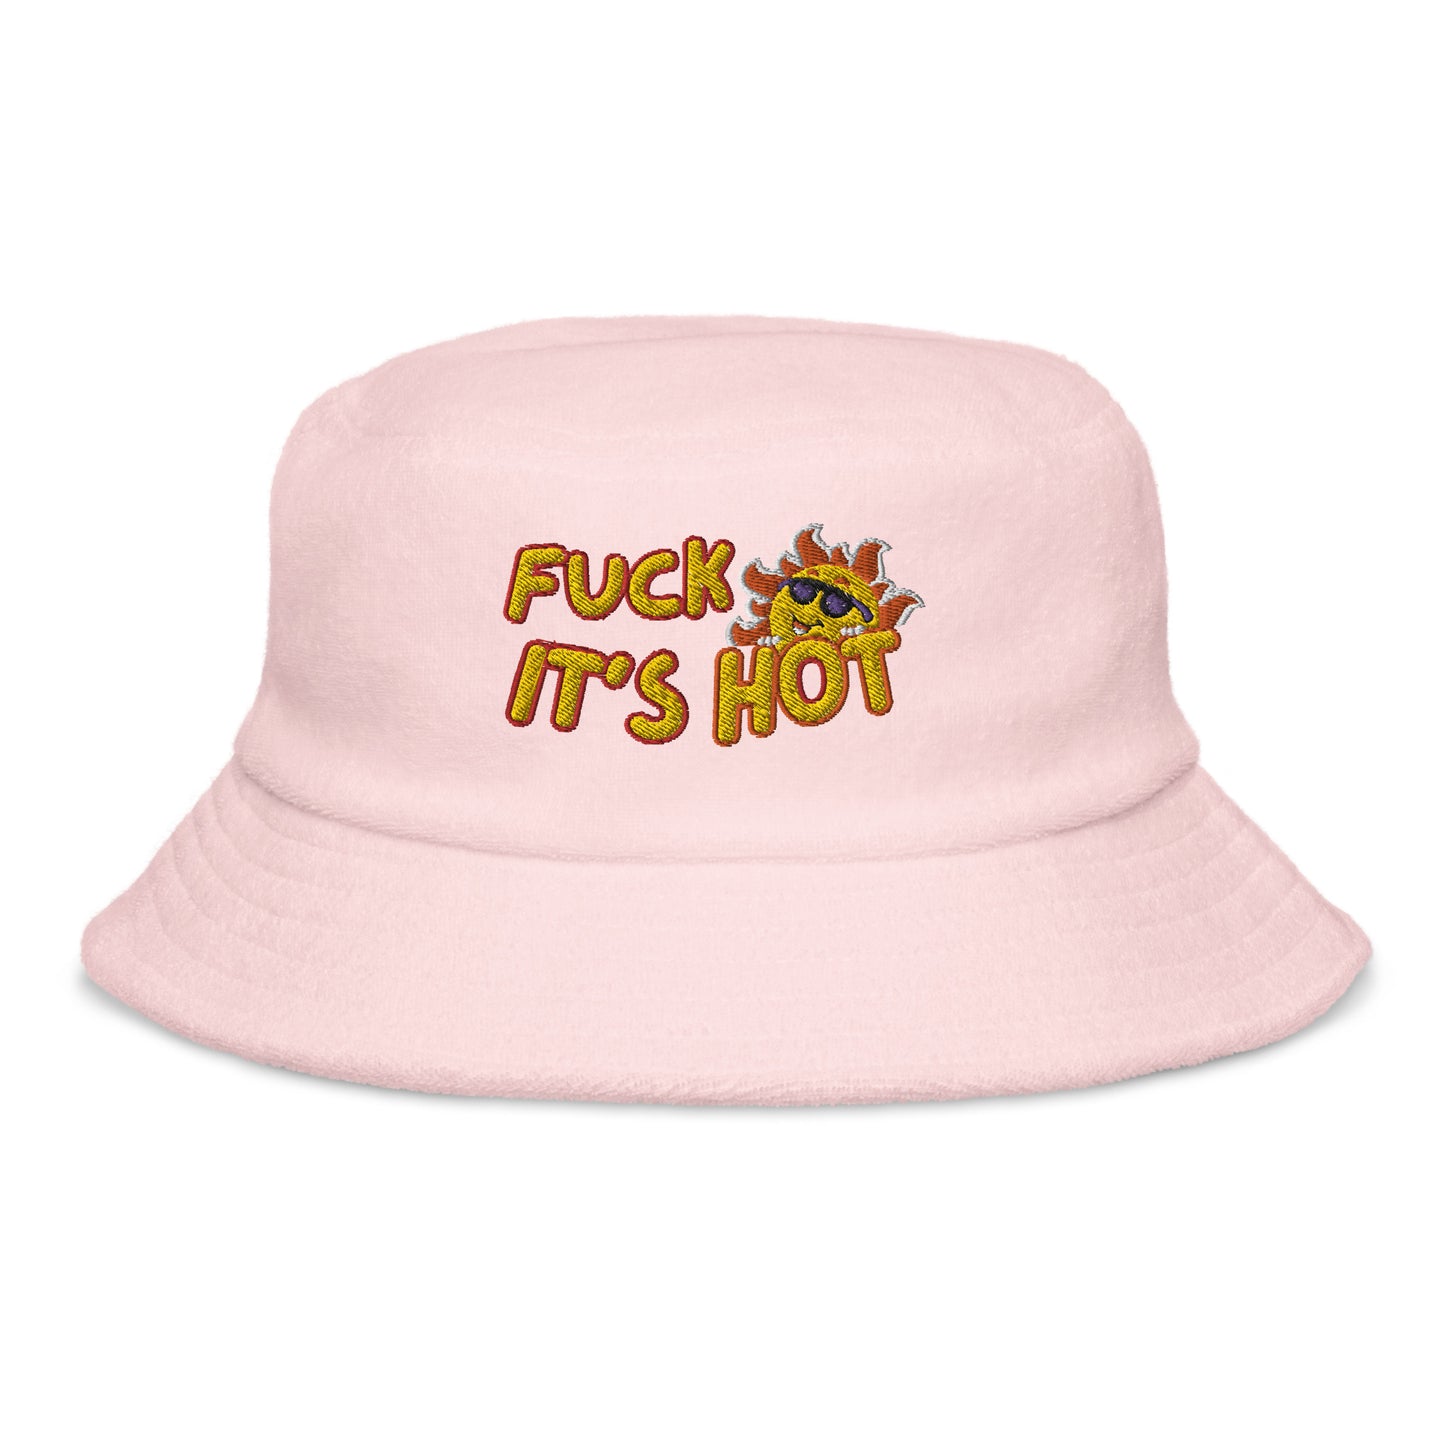 Fuck It's Hot - Unstructured Terry Cloth Bucket Hat